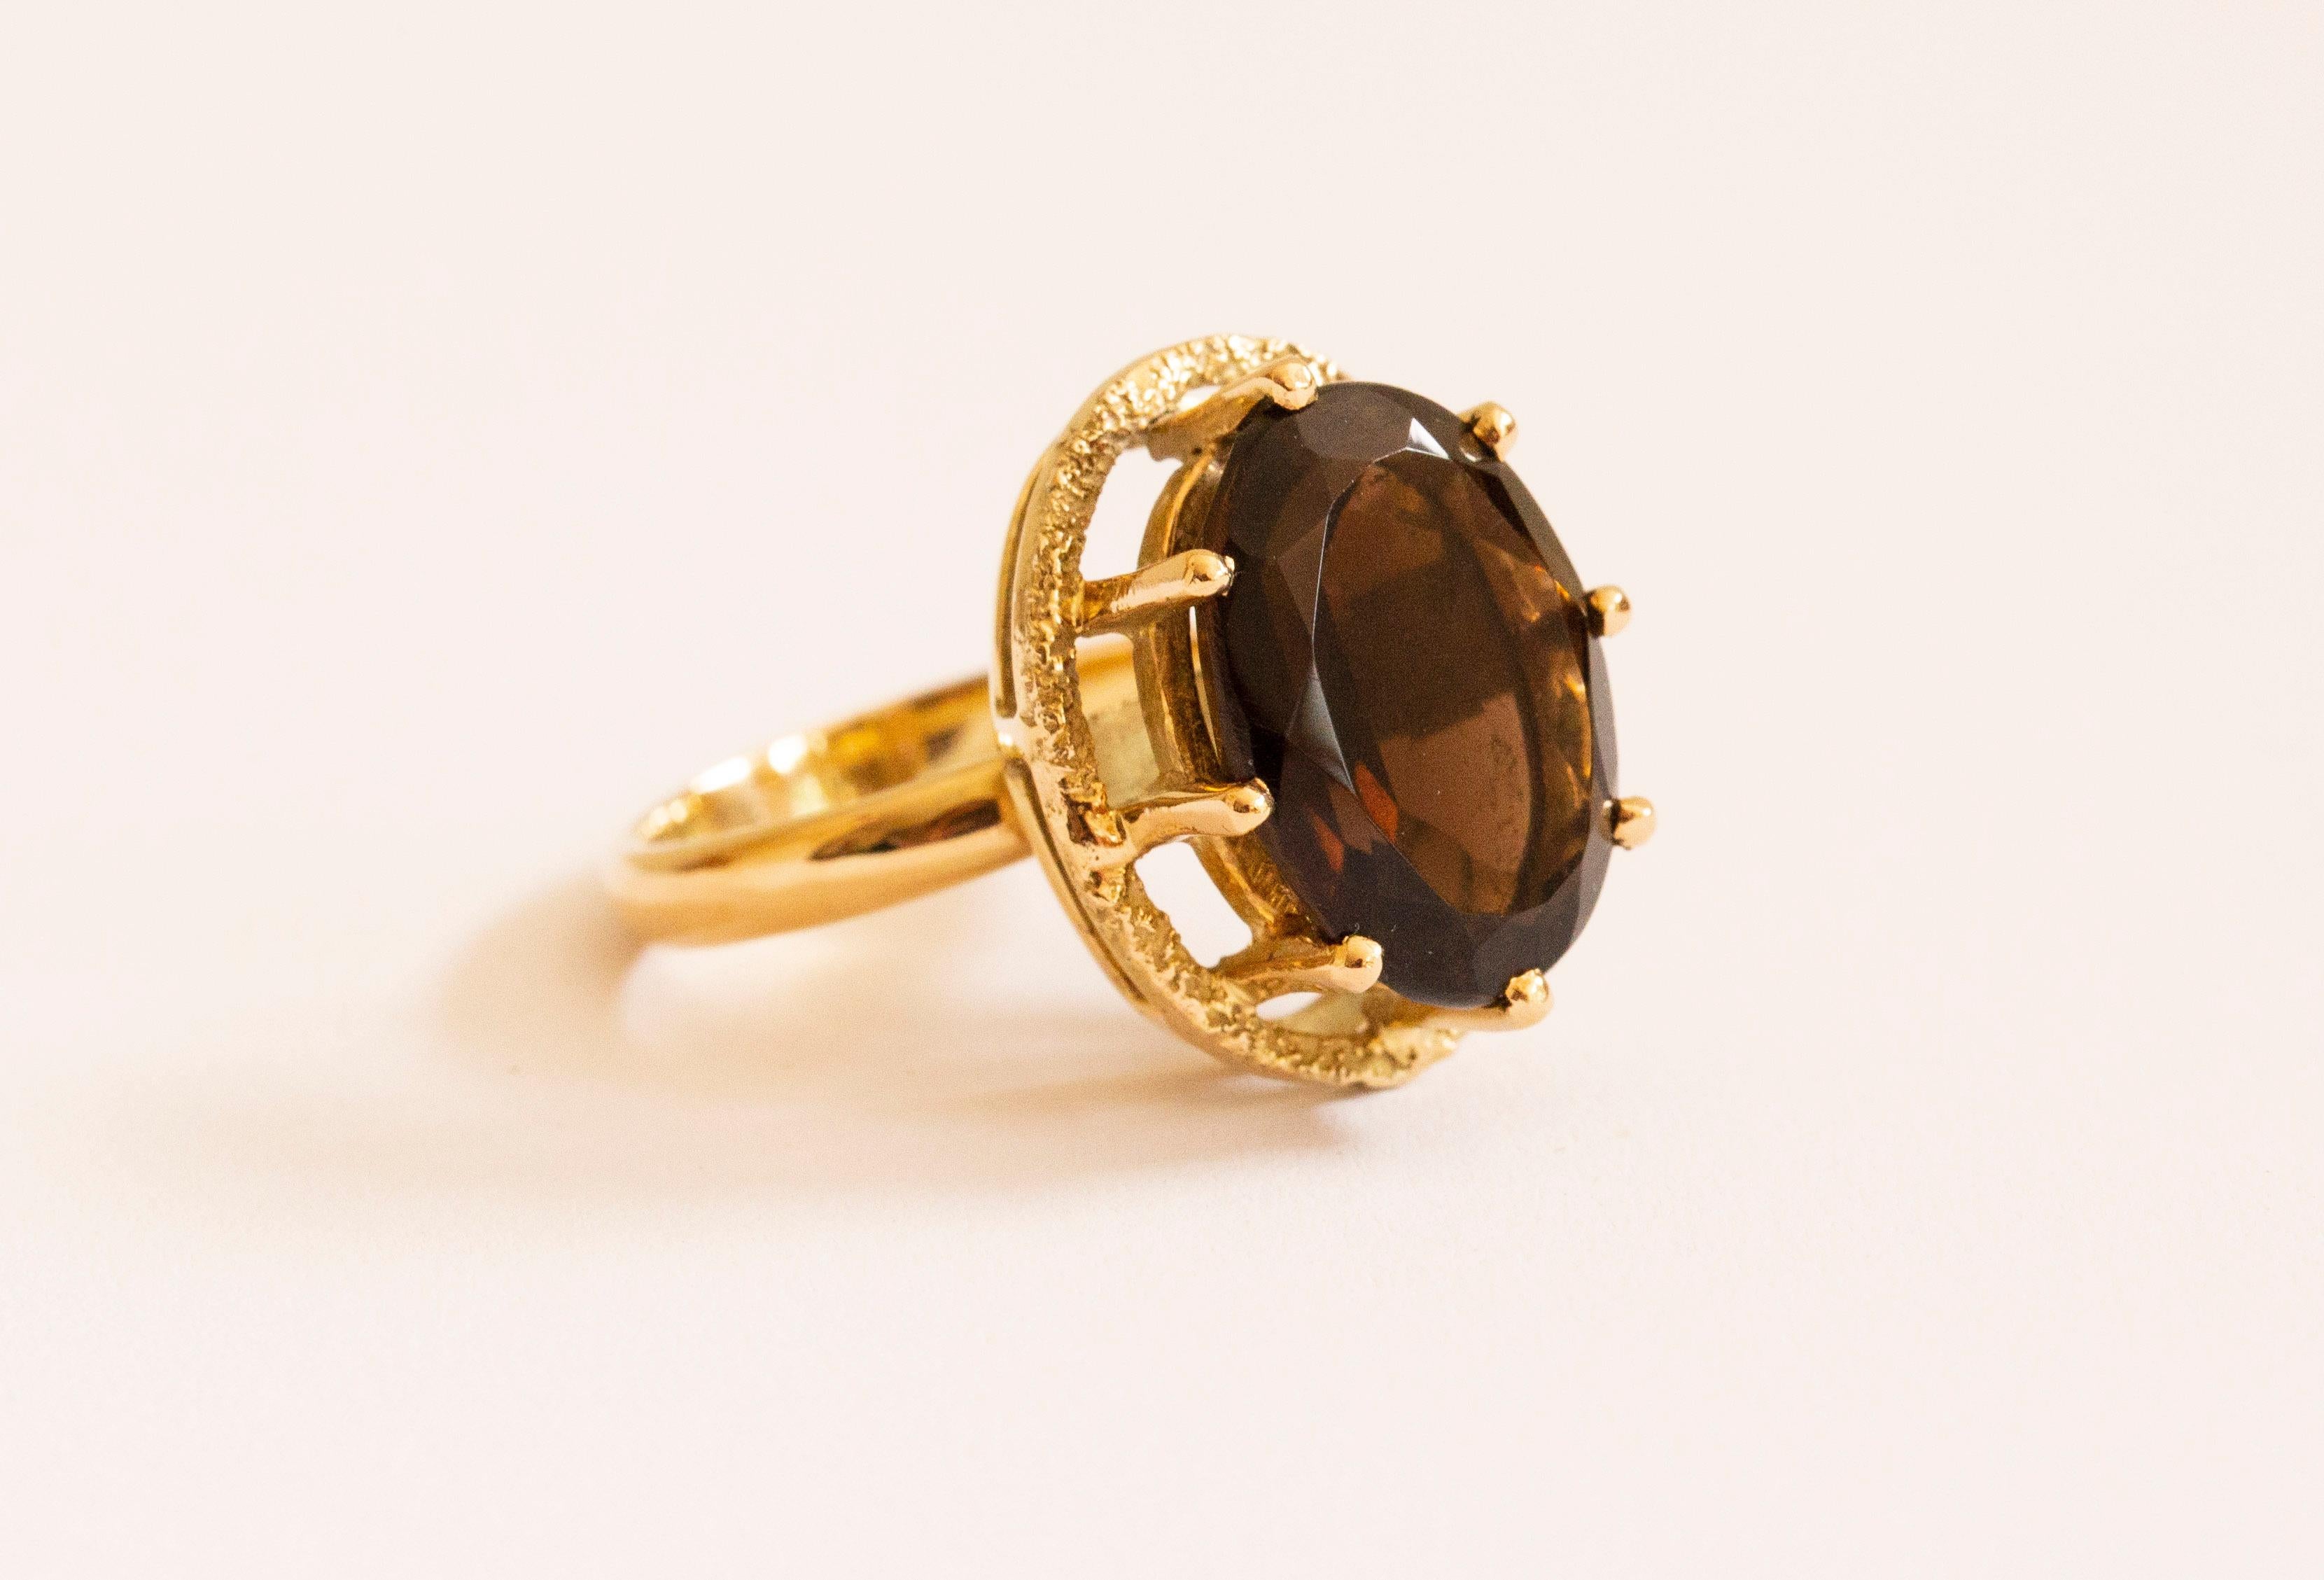 A vintage ring made of 14 karat solid yellow gold with a faceted smoky quartz. The ring is stamped with 585 that stands for 14 karat gold content and it was tested by a professional jeweler for the gold content and the authenticity. The ring is in